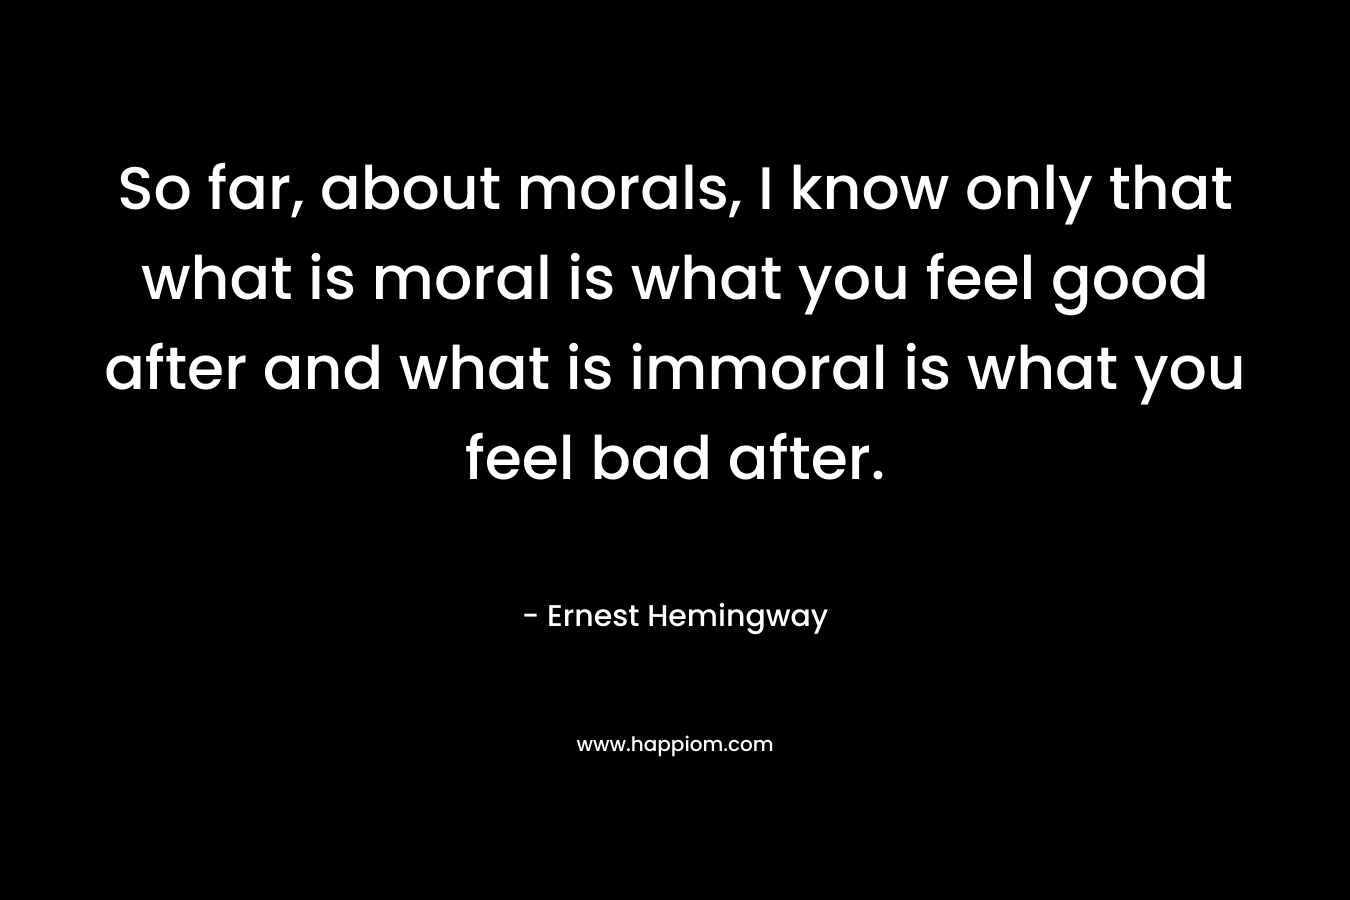 So far, about morals, I know only that what is moral is what you feel good after and what is immoral is what you feel bad after. – Ernest Hemingway